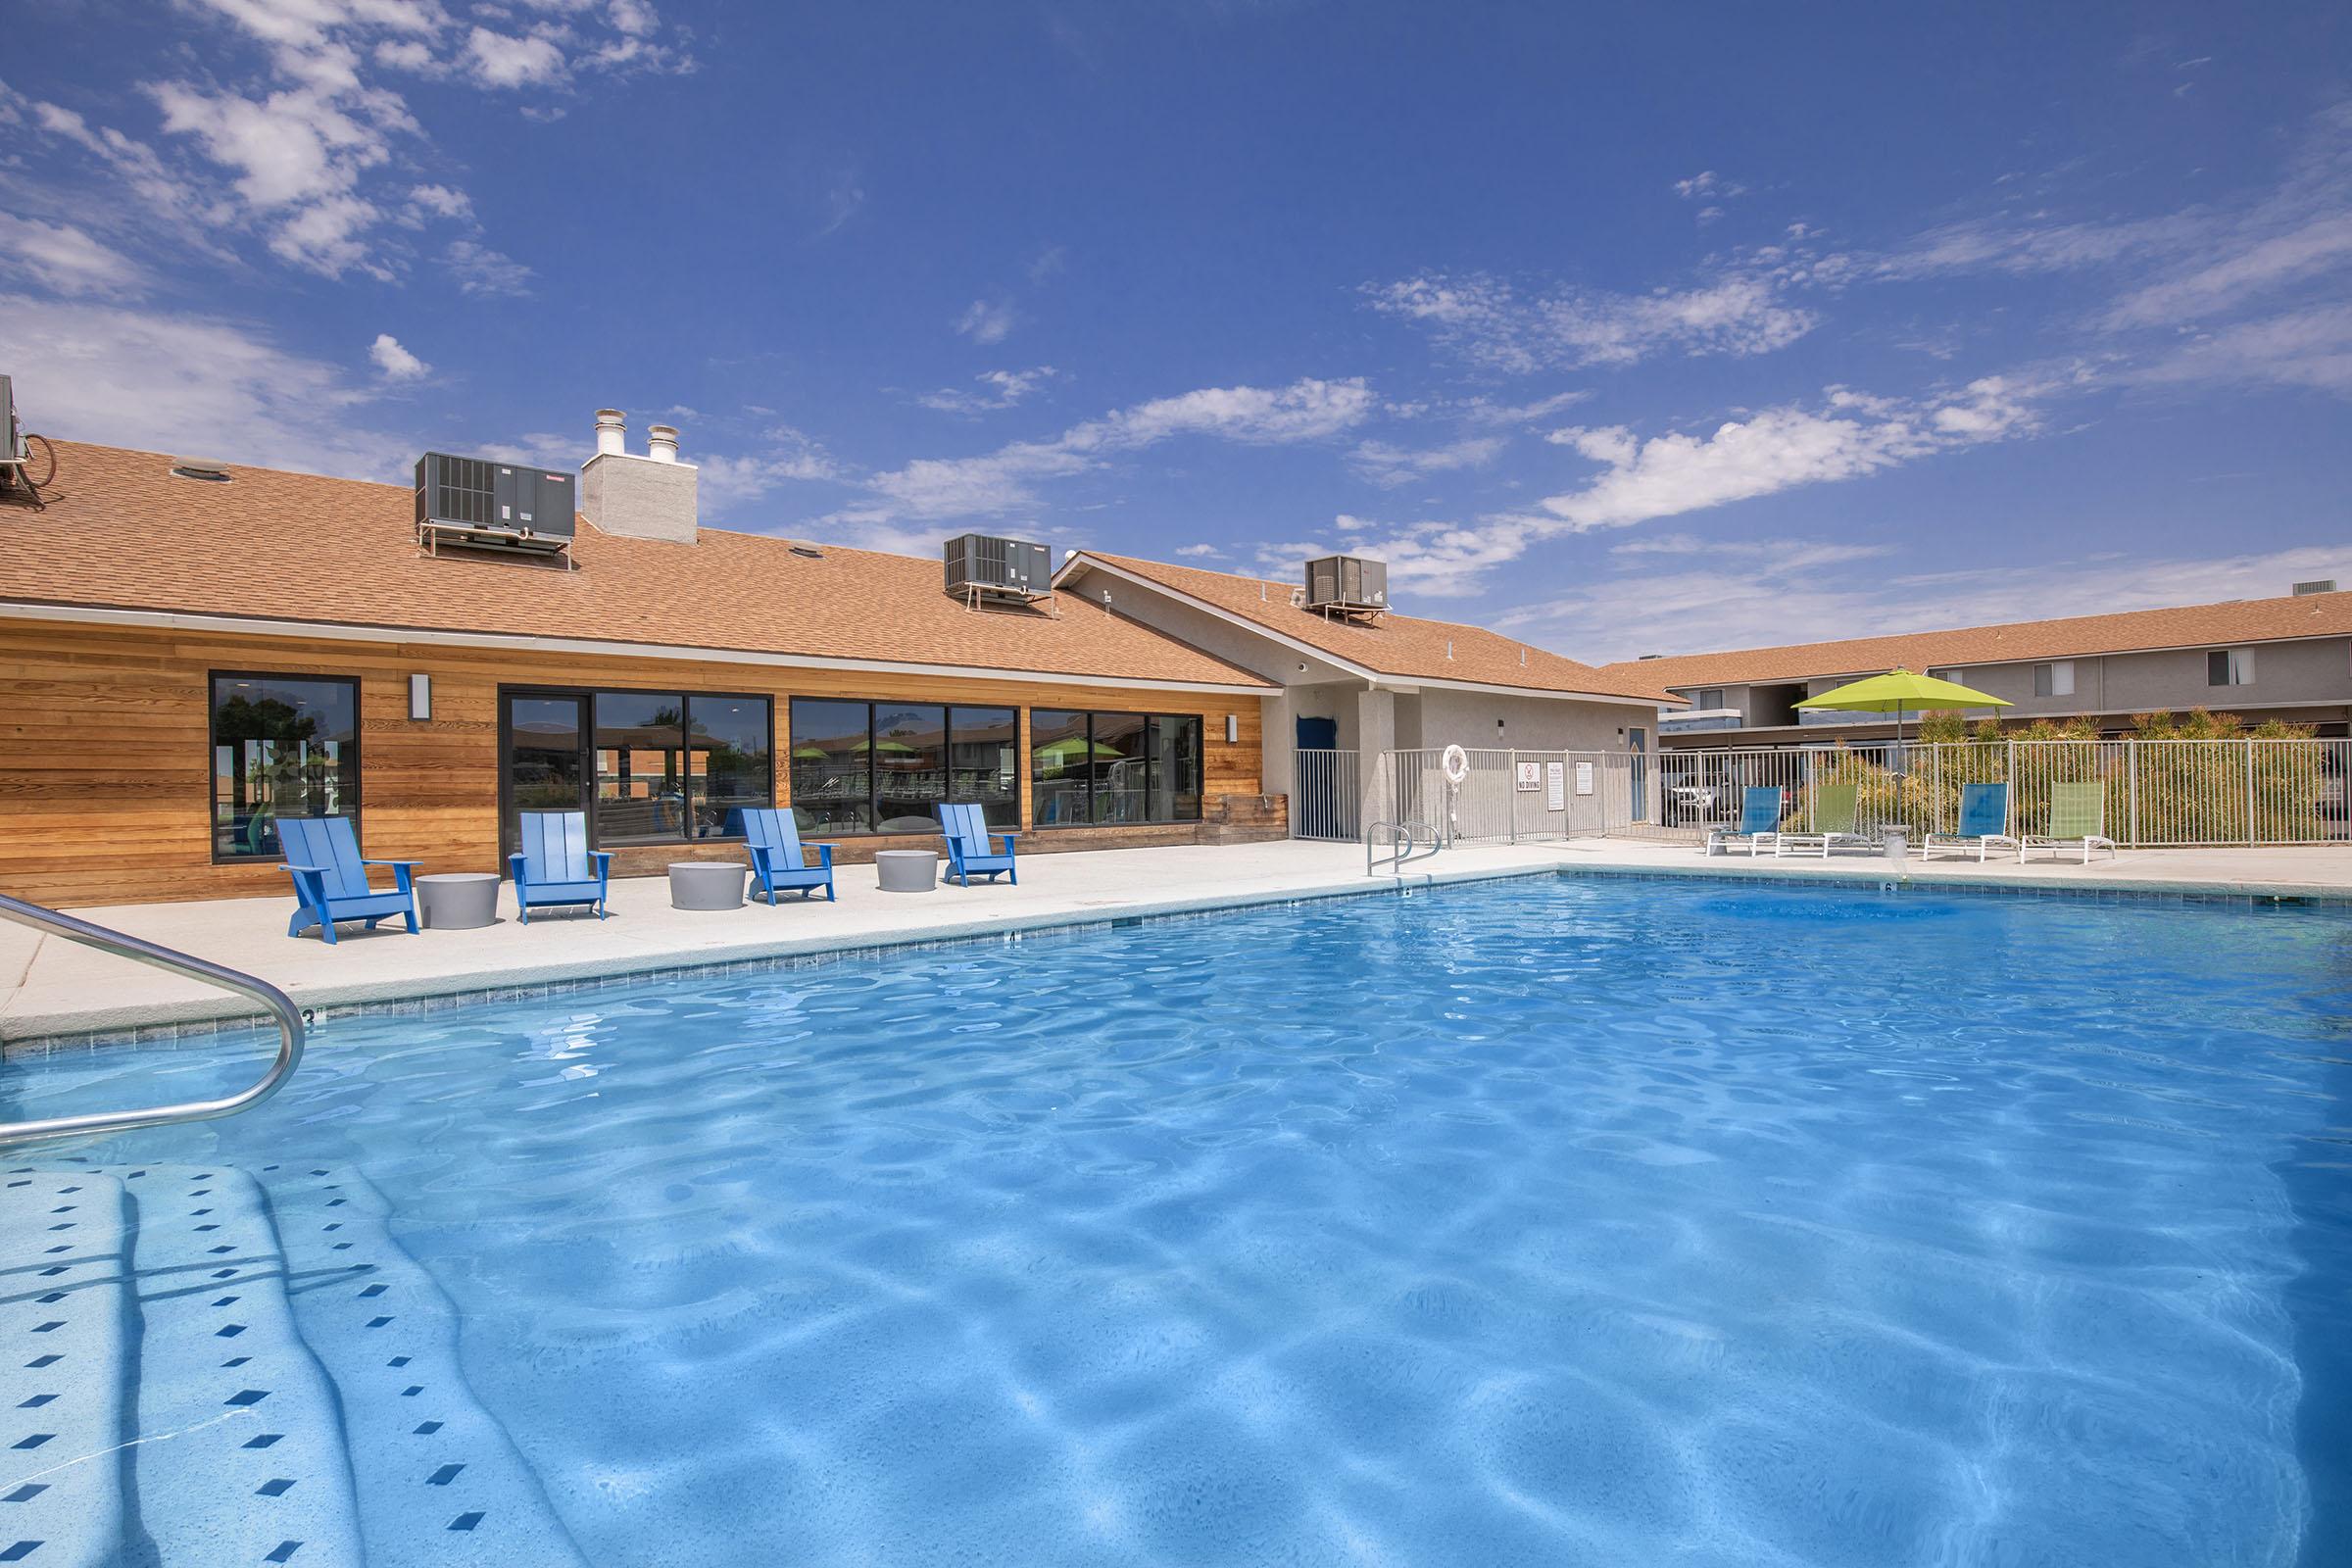 Large blue sparkling resort-style pool with sunbathing chairs at Rise at the District Mesa, AZ apartments